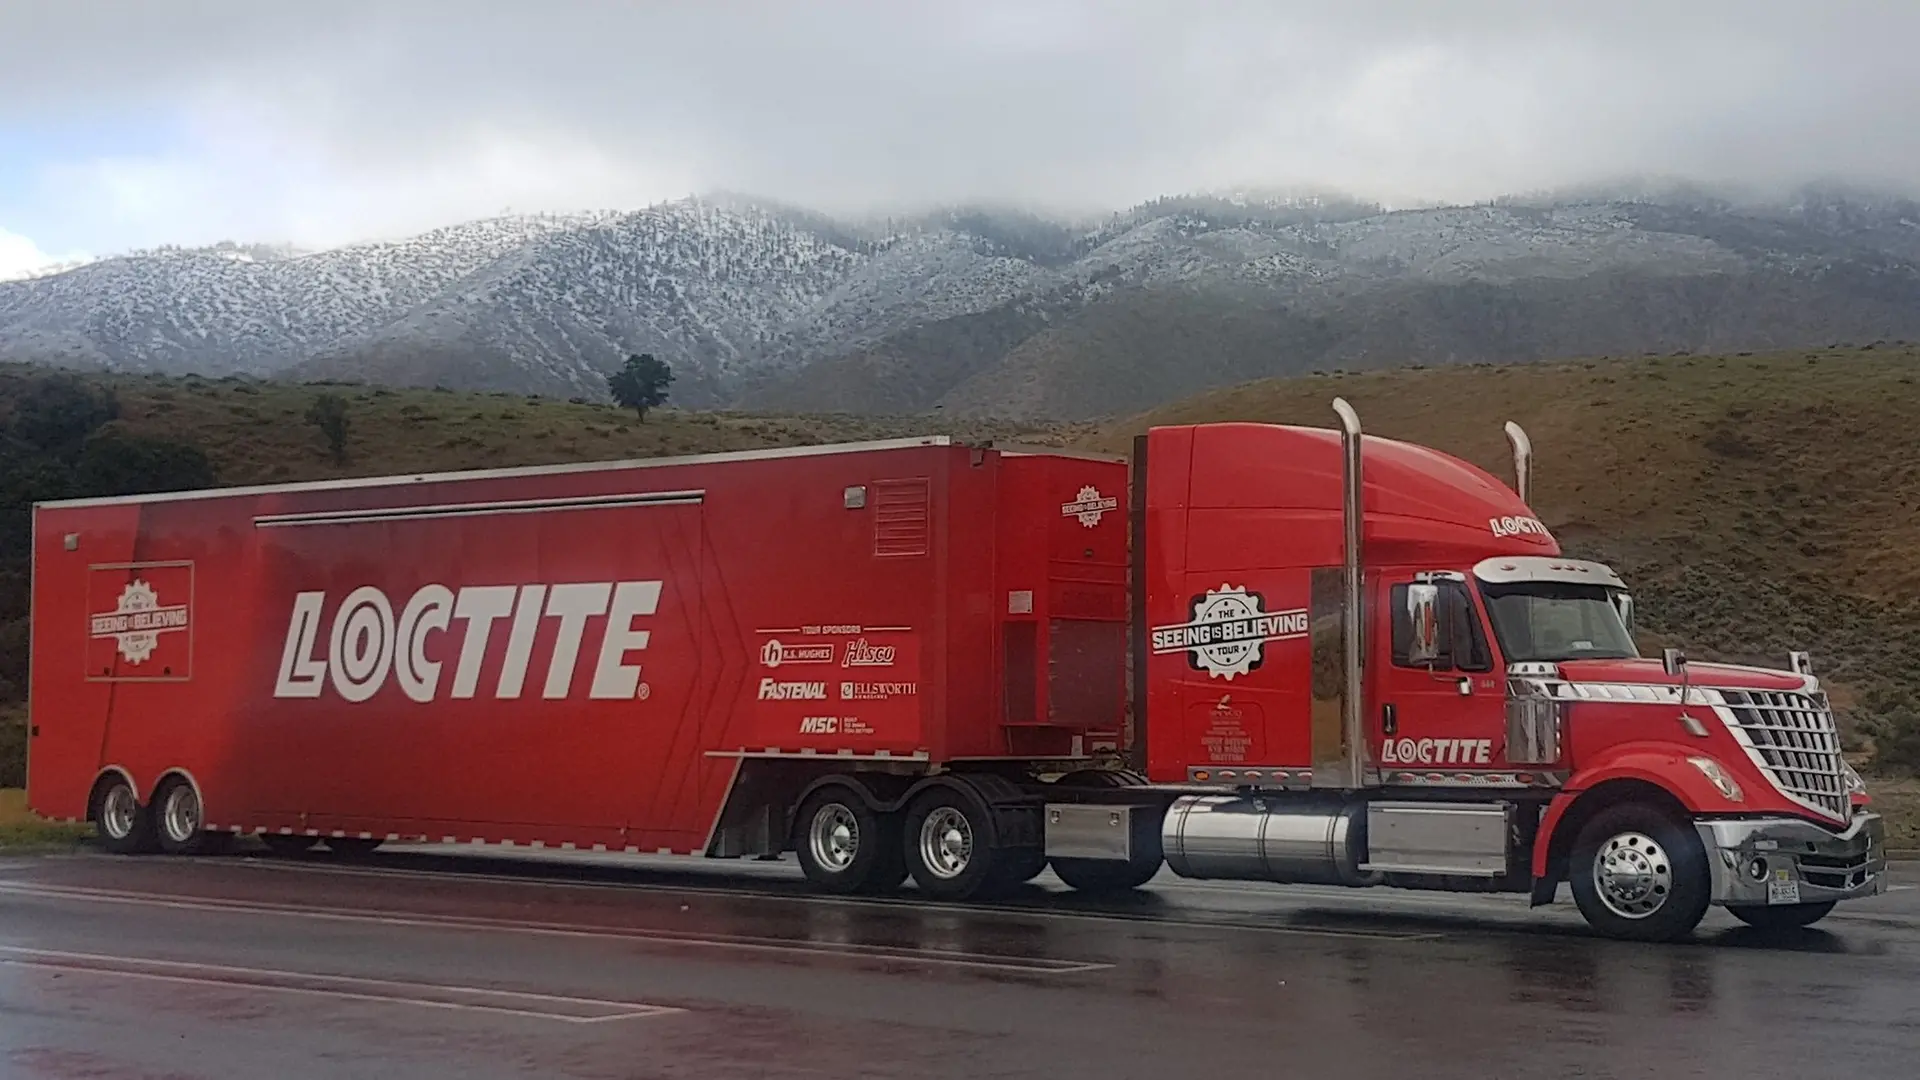 The 48-foot tractor-trailer that brings the strength and speed of LOCTITE® adhesives to customers is a showstopper on roads across North America.